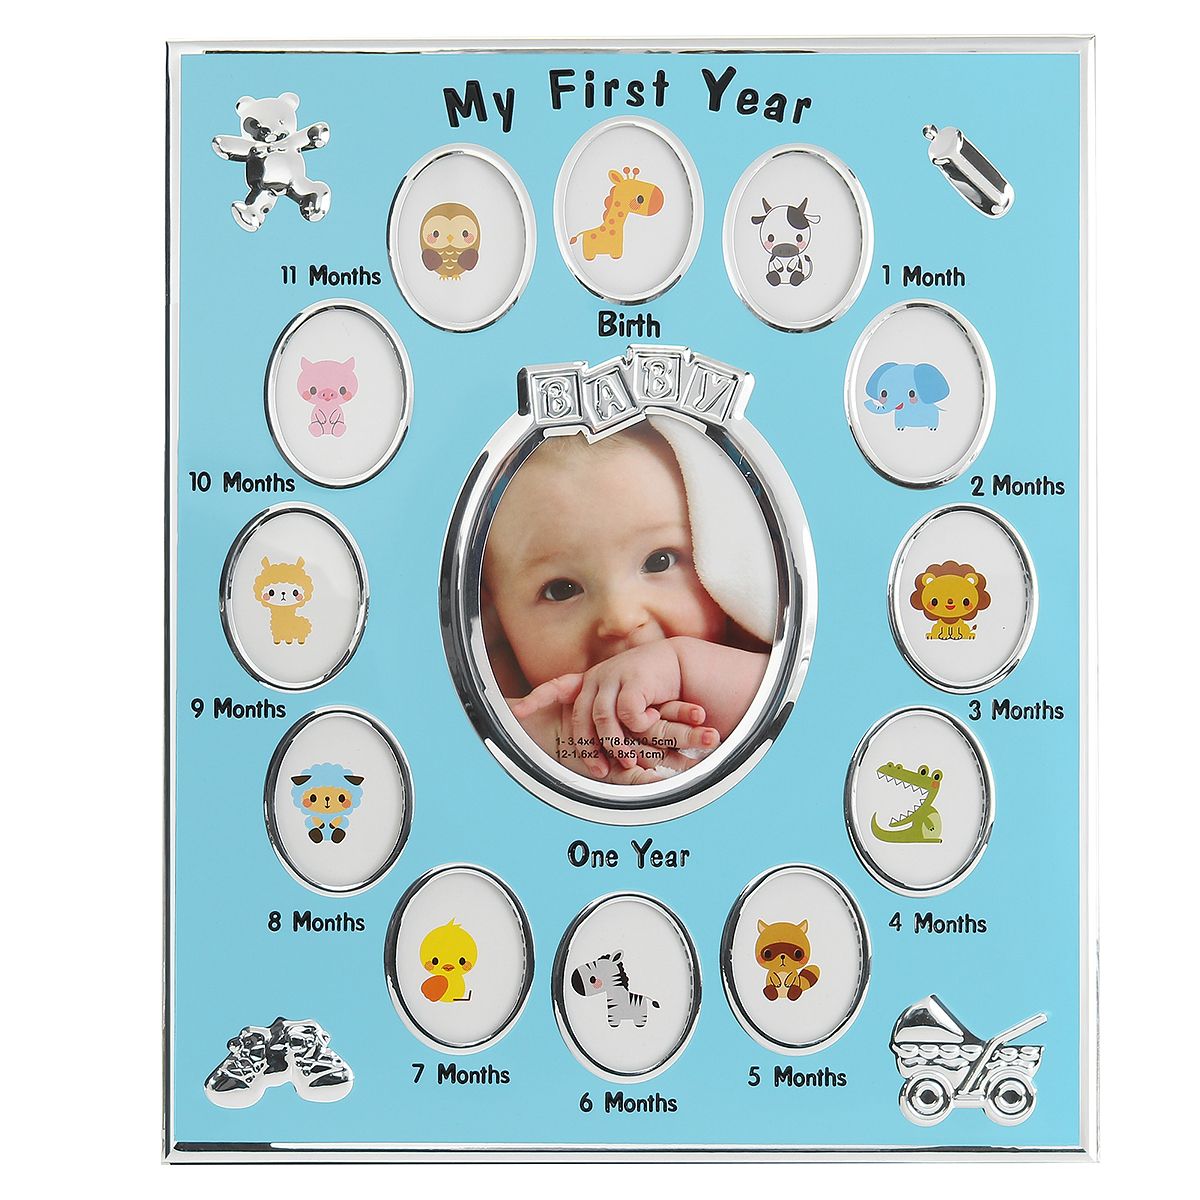 One-Year-Anniversary-12-Month-My-First-Year-One-year-old-Baby-Desktop-Stand-Decor-Photo-Frame-1424111